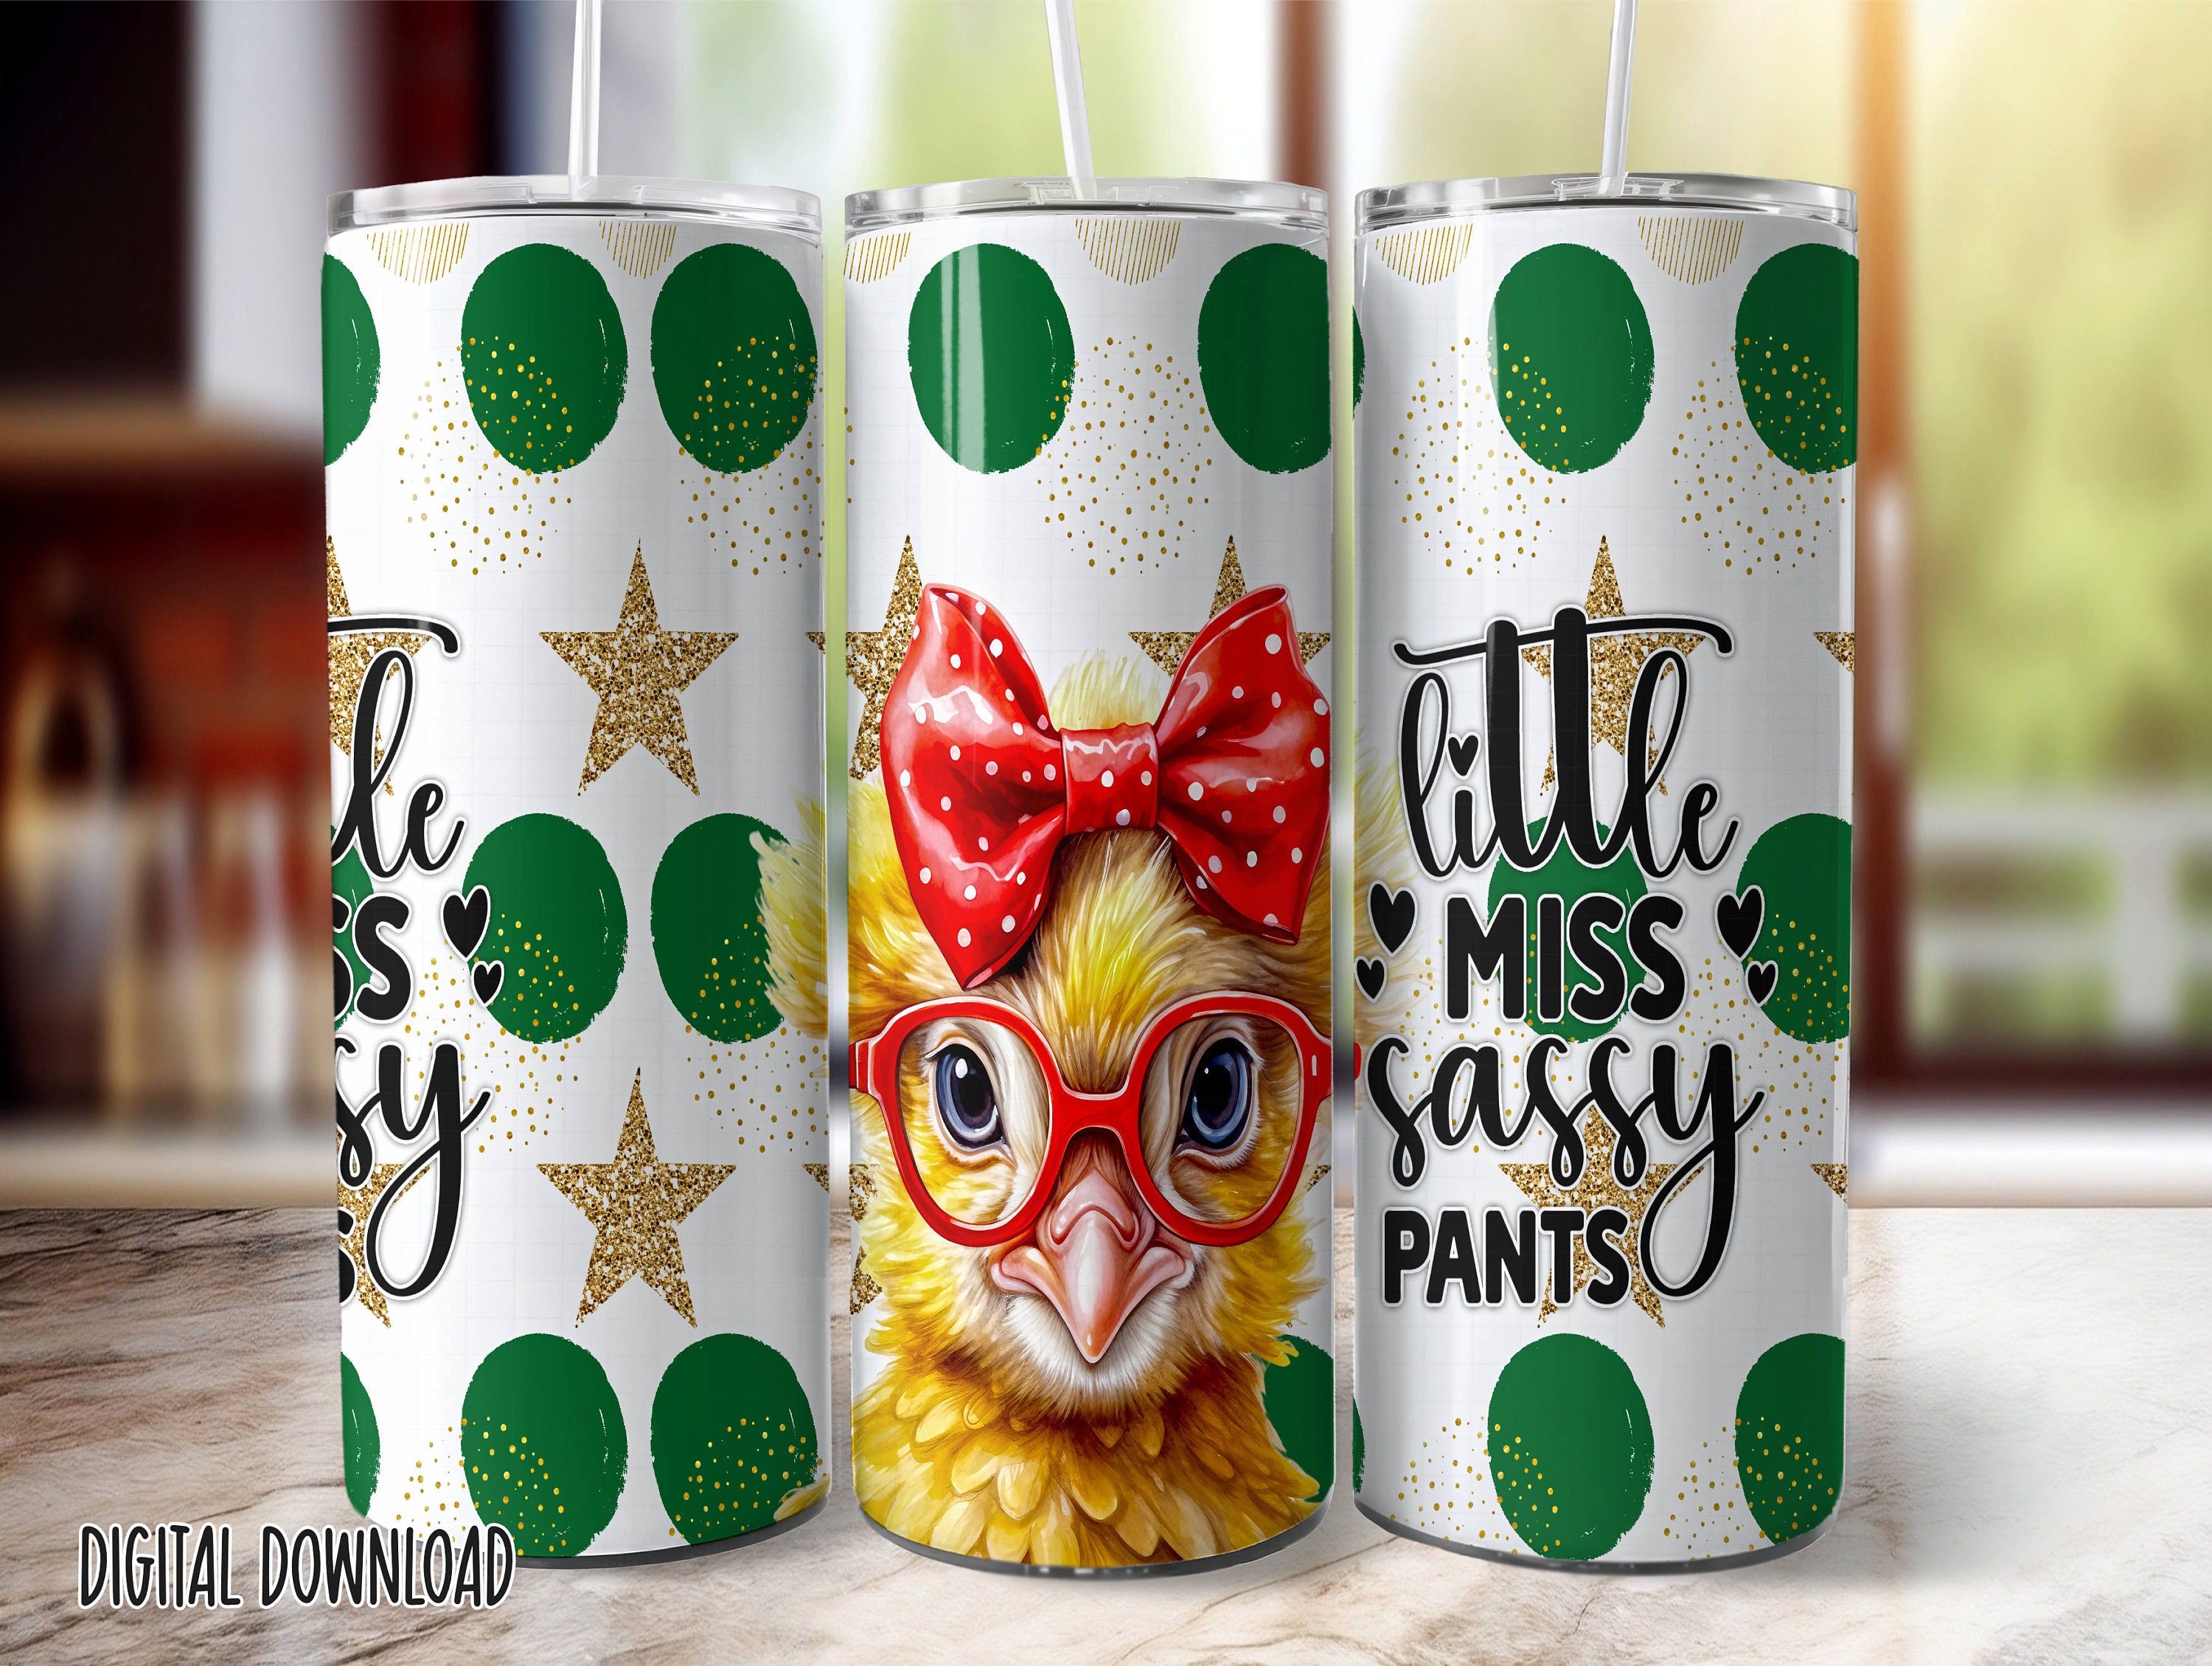 40 oz Tumbler with Handle and Straw Lid Leak Proof, Chicken and Rooster  Design Coffee Travel Mug with Handle Insulated for Hot and Cold Drink Ice,  Birthday Gifts for Women Chicken Lovers 